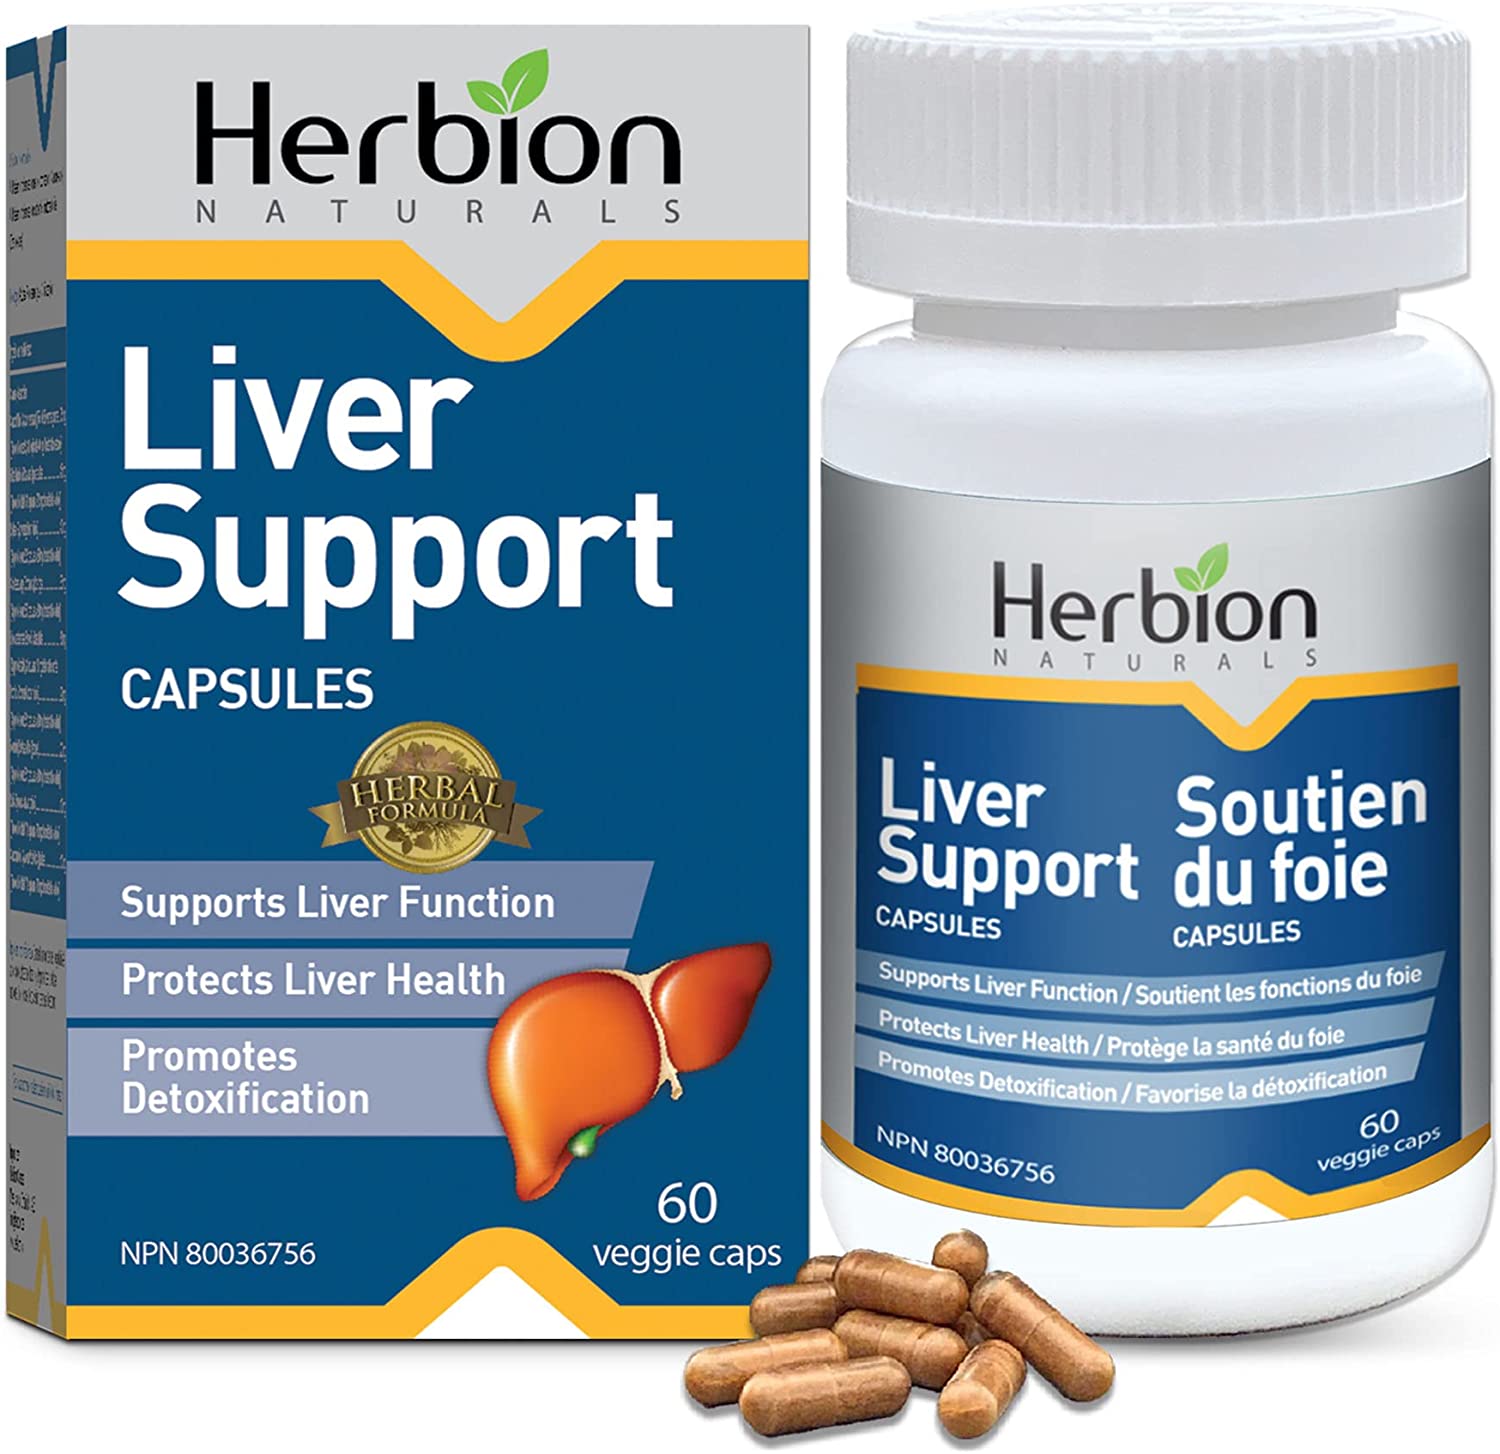 Herbion Liver Support 60 vcaps